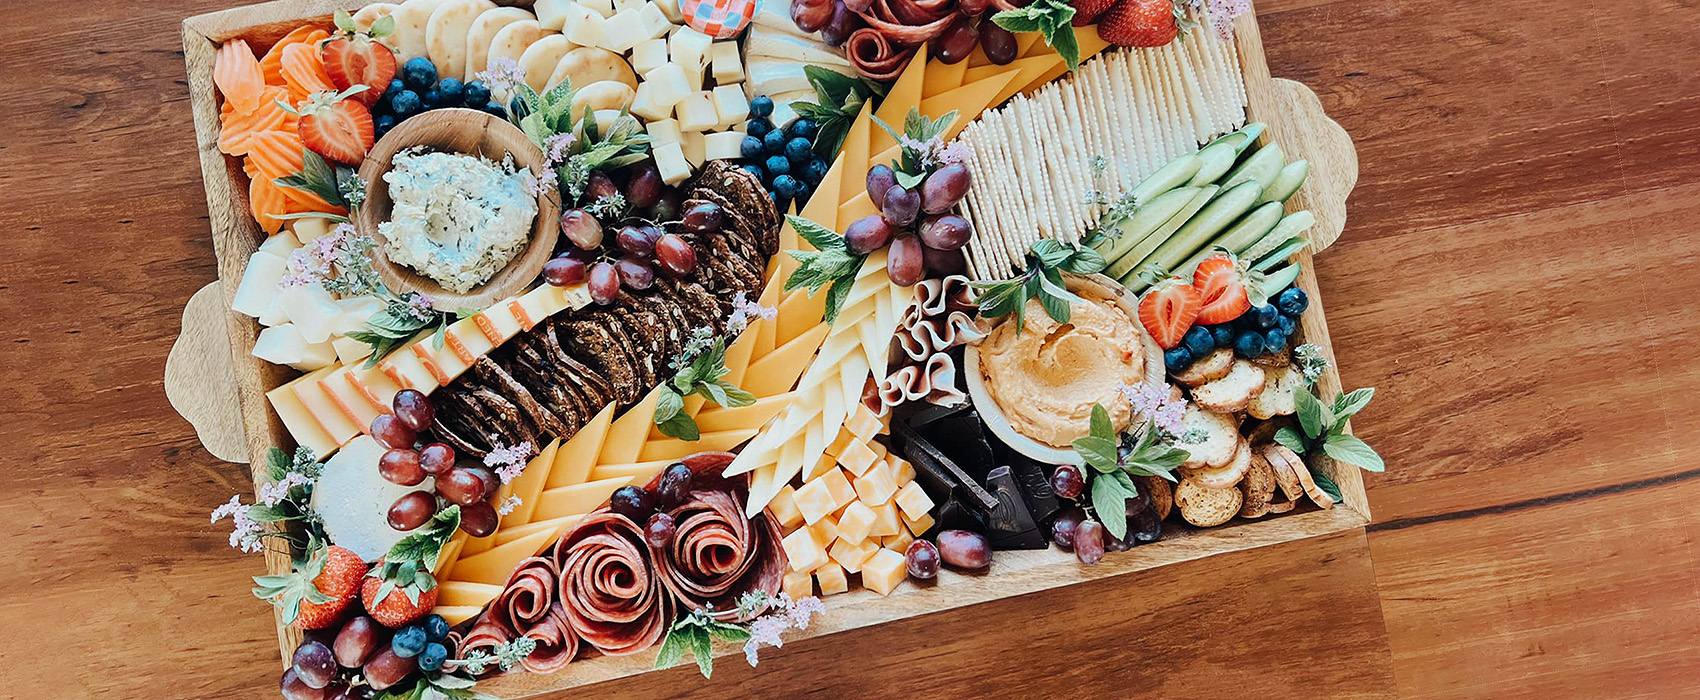 Charcuterie large tray